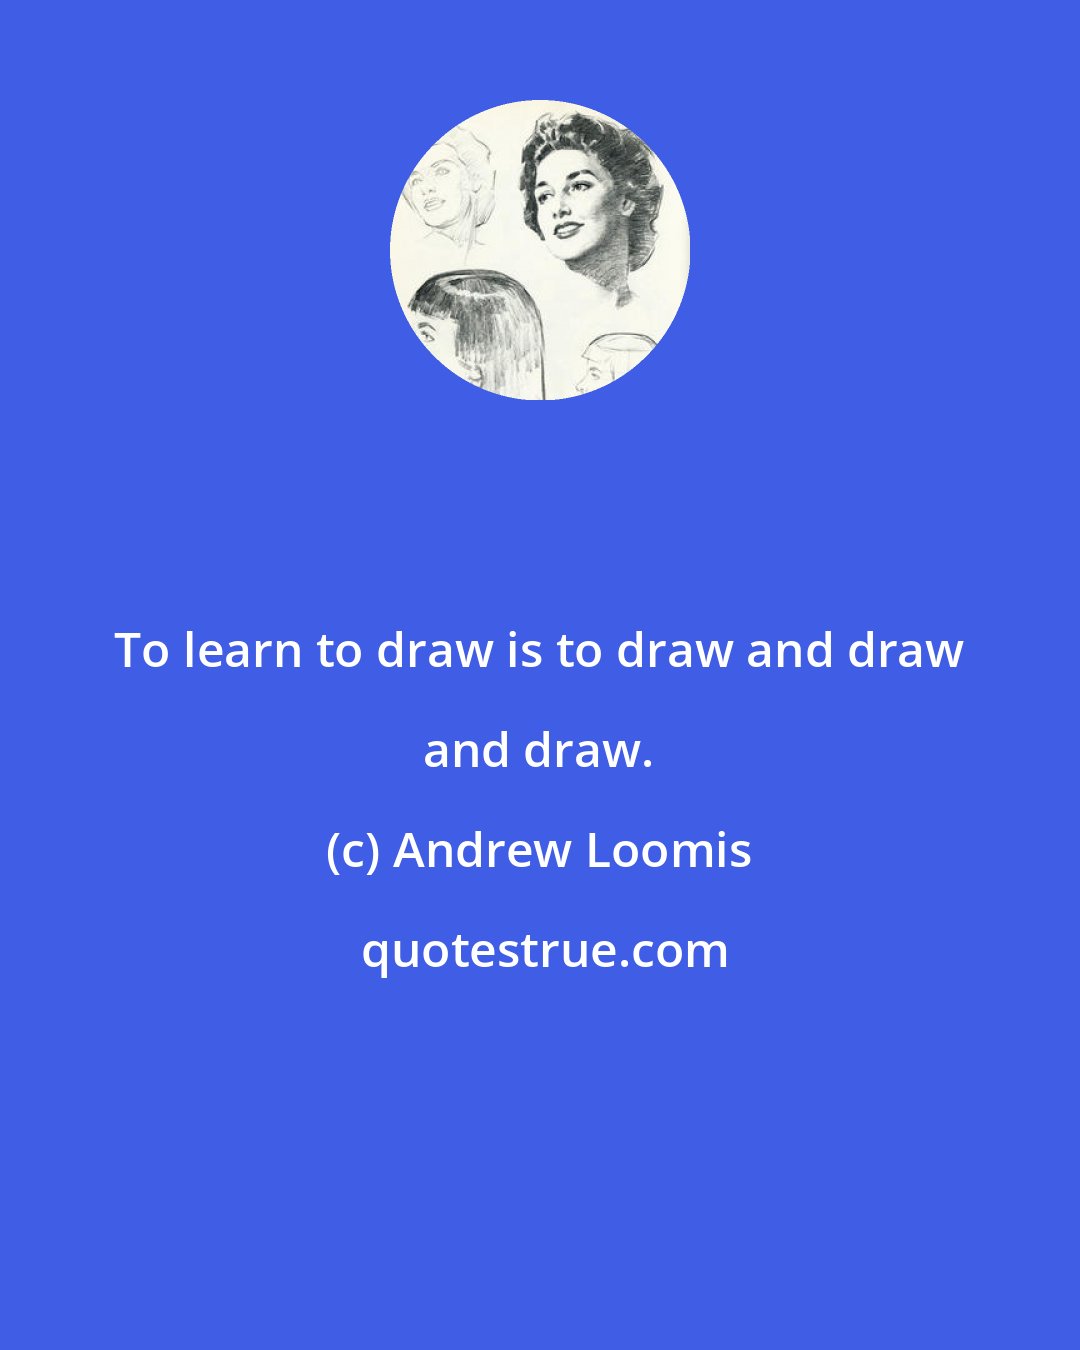 Andrew Loomis: To learn to draw is to draw and draw and draw.